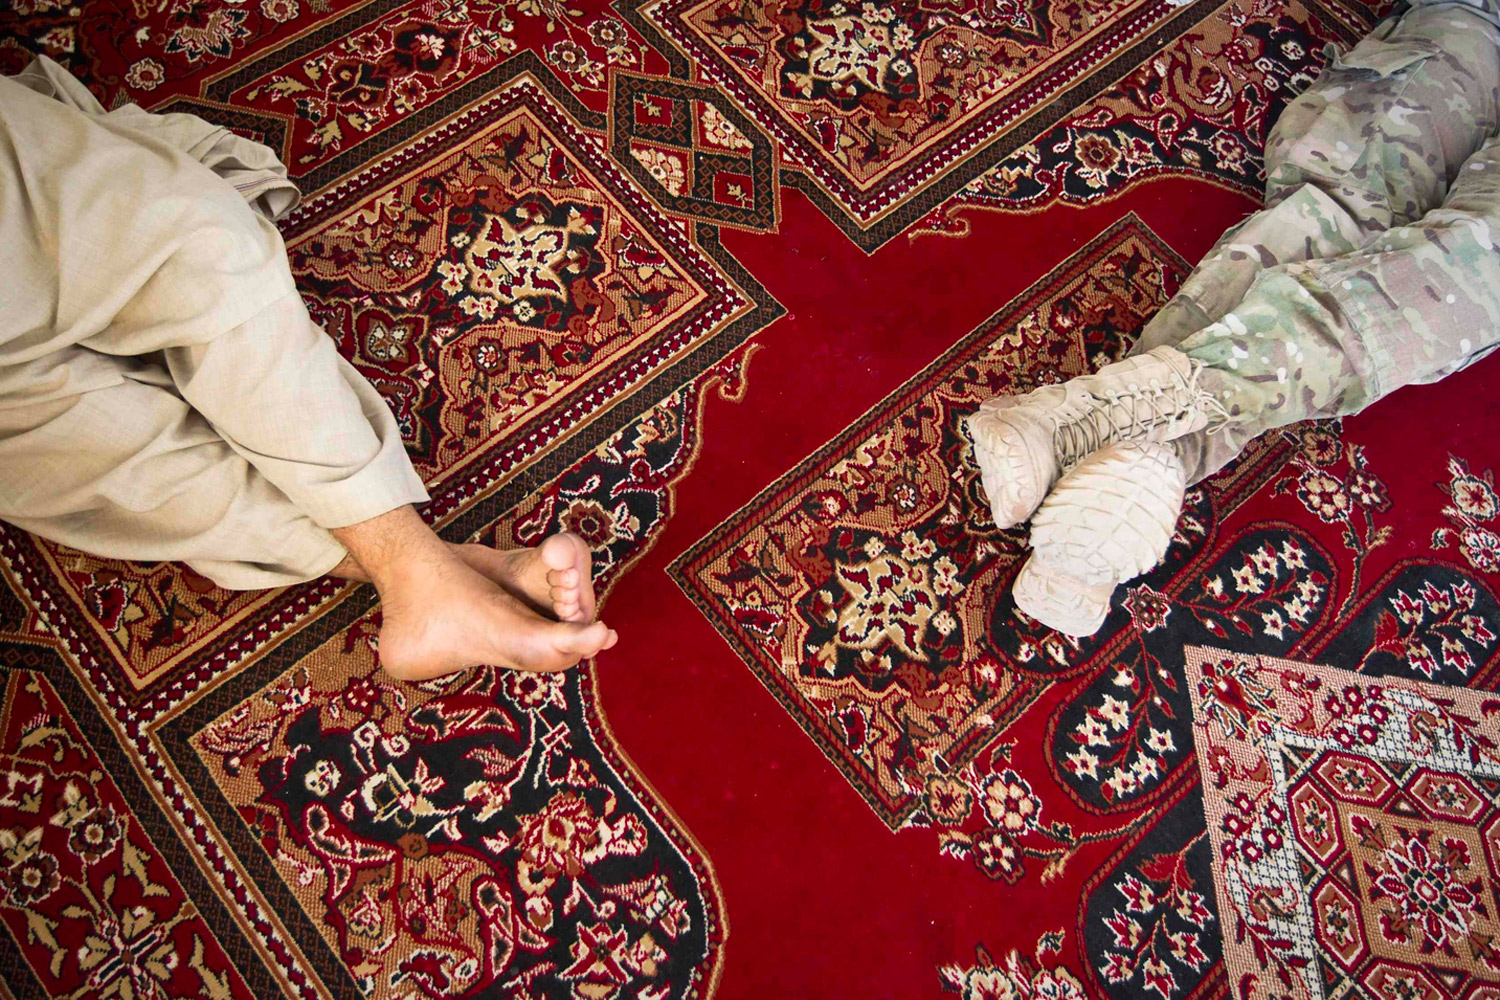 June 1, 2012. Michael Kelvington (R), a U.S. Army Captain, commander of the Battle company, 1-508 Parachute Infantry battalion, 4th Brigade Combat Team, 82nd Airborne Division, and Haji Lala, a local elder, sit on a carpet as they share dinner in the town of Senjaray, Afghanistan.